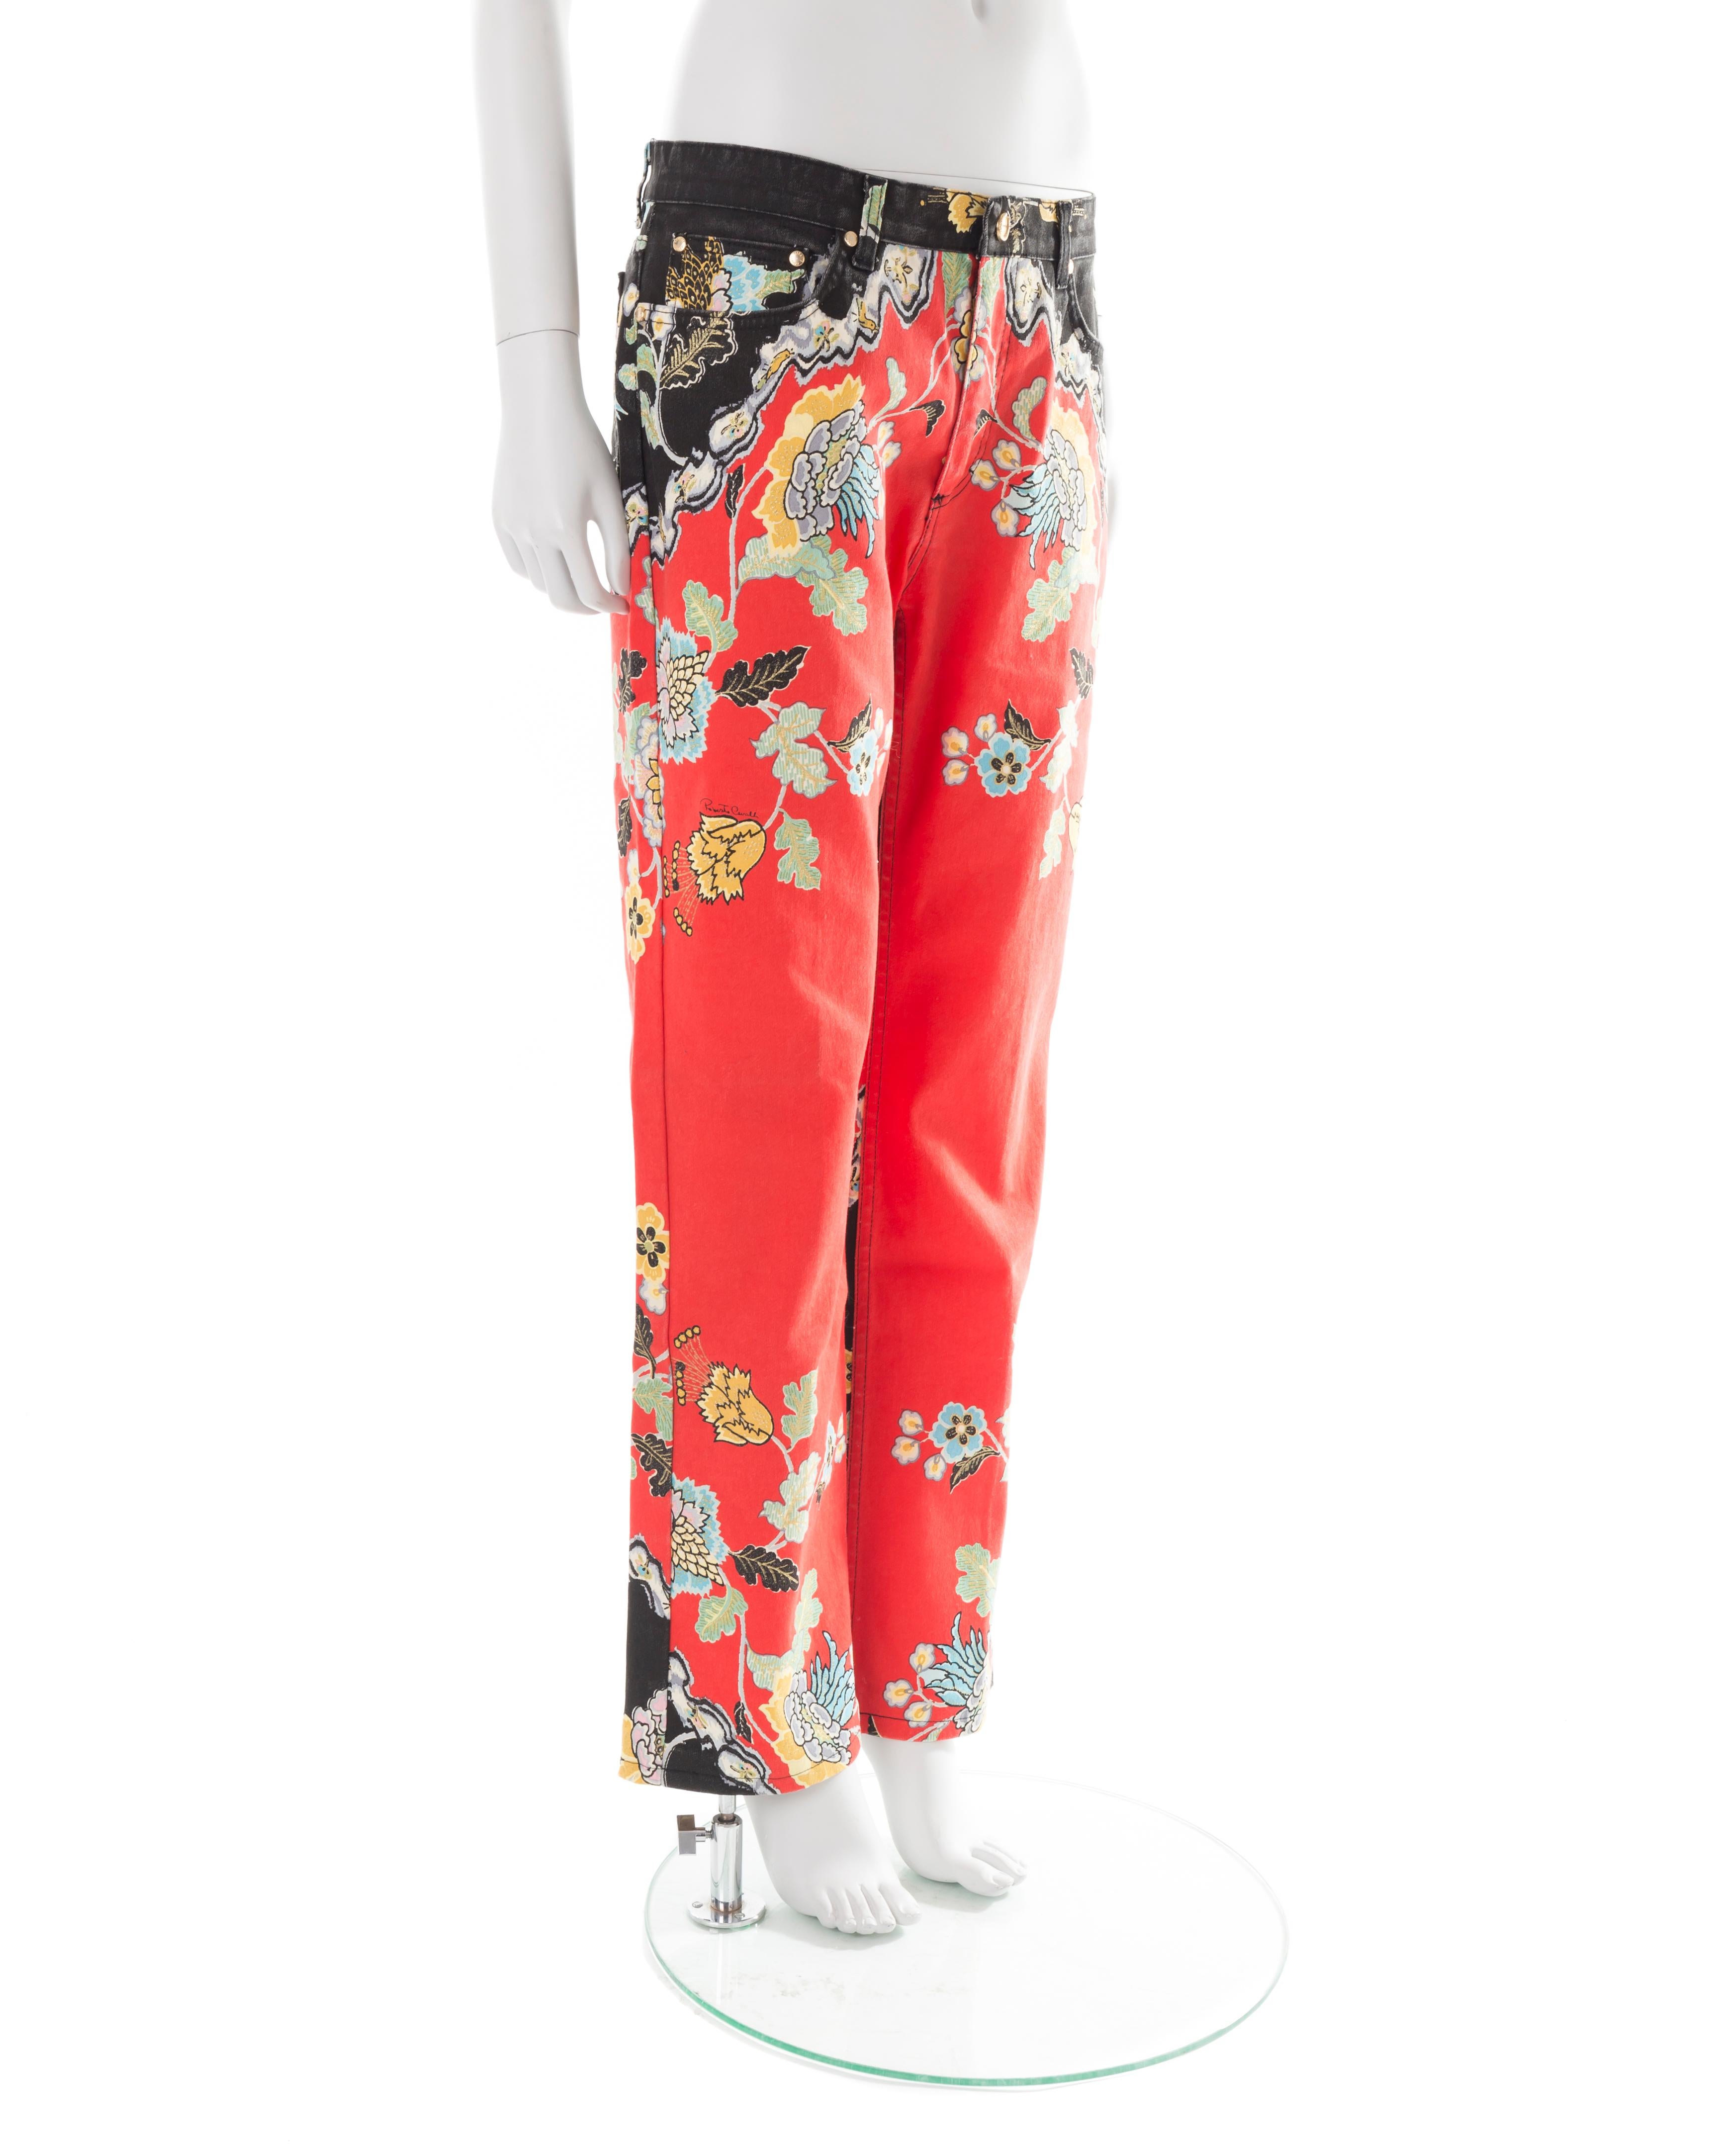 - Cotton denim pants
- Red/black asian floral print with golden hues 
- Straight fit